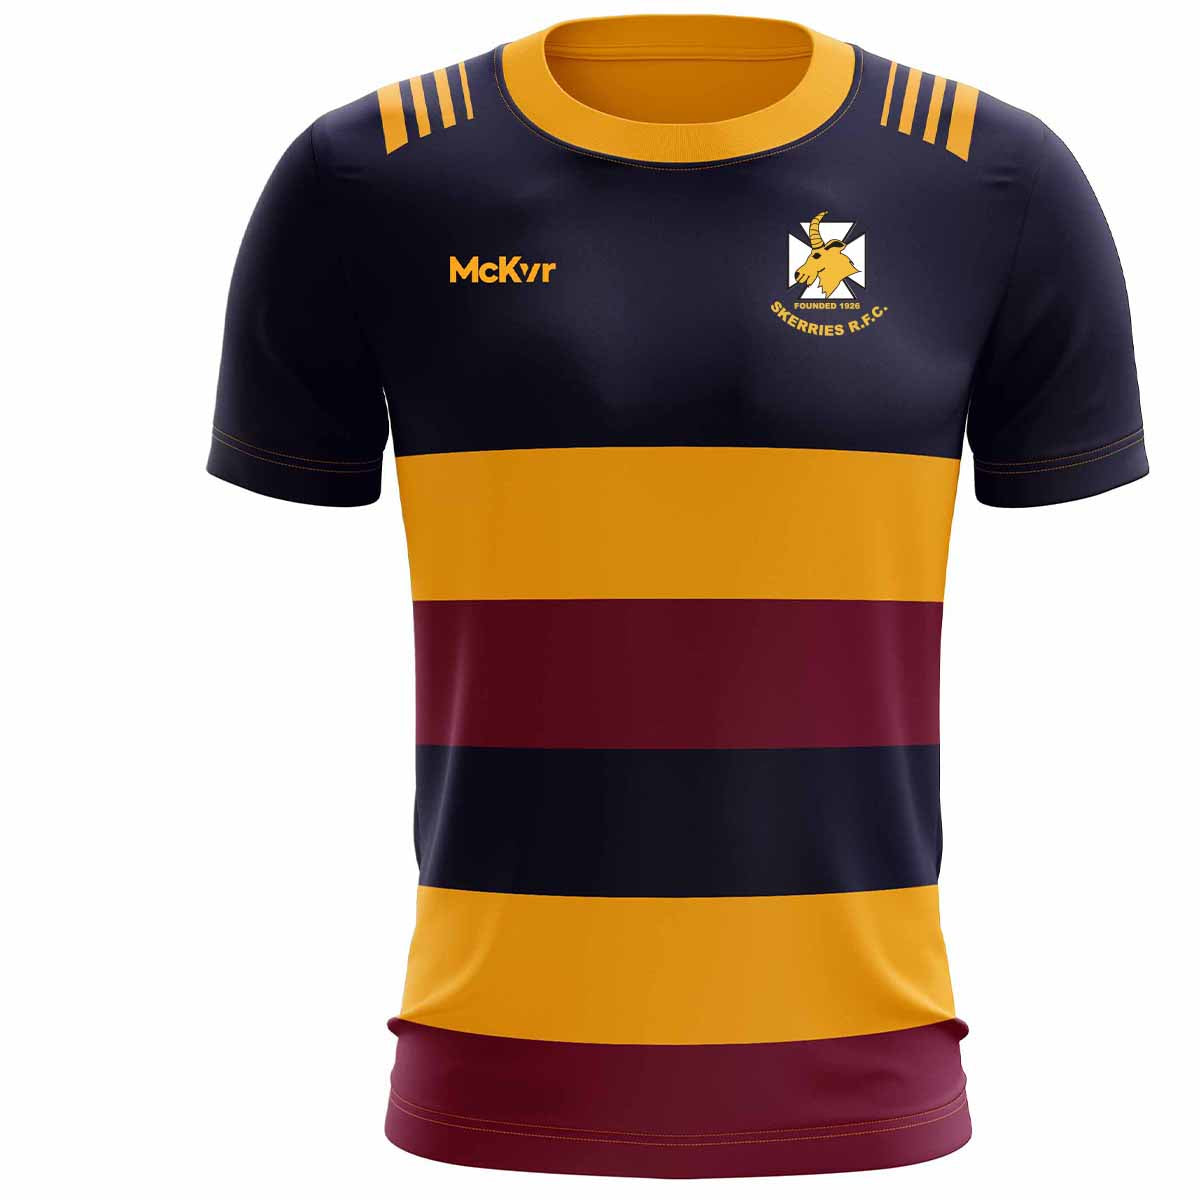 Mc Keever Skerries RFC Playing Jersey - Adult - Navy/Maroon/Amber Player Fit